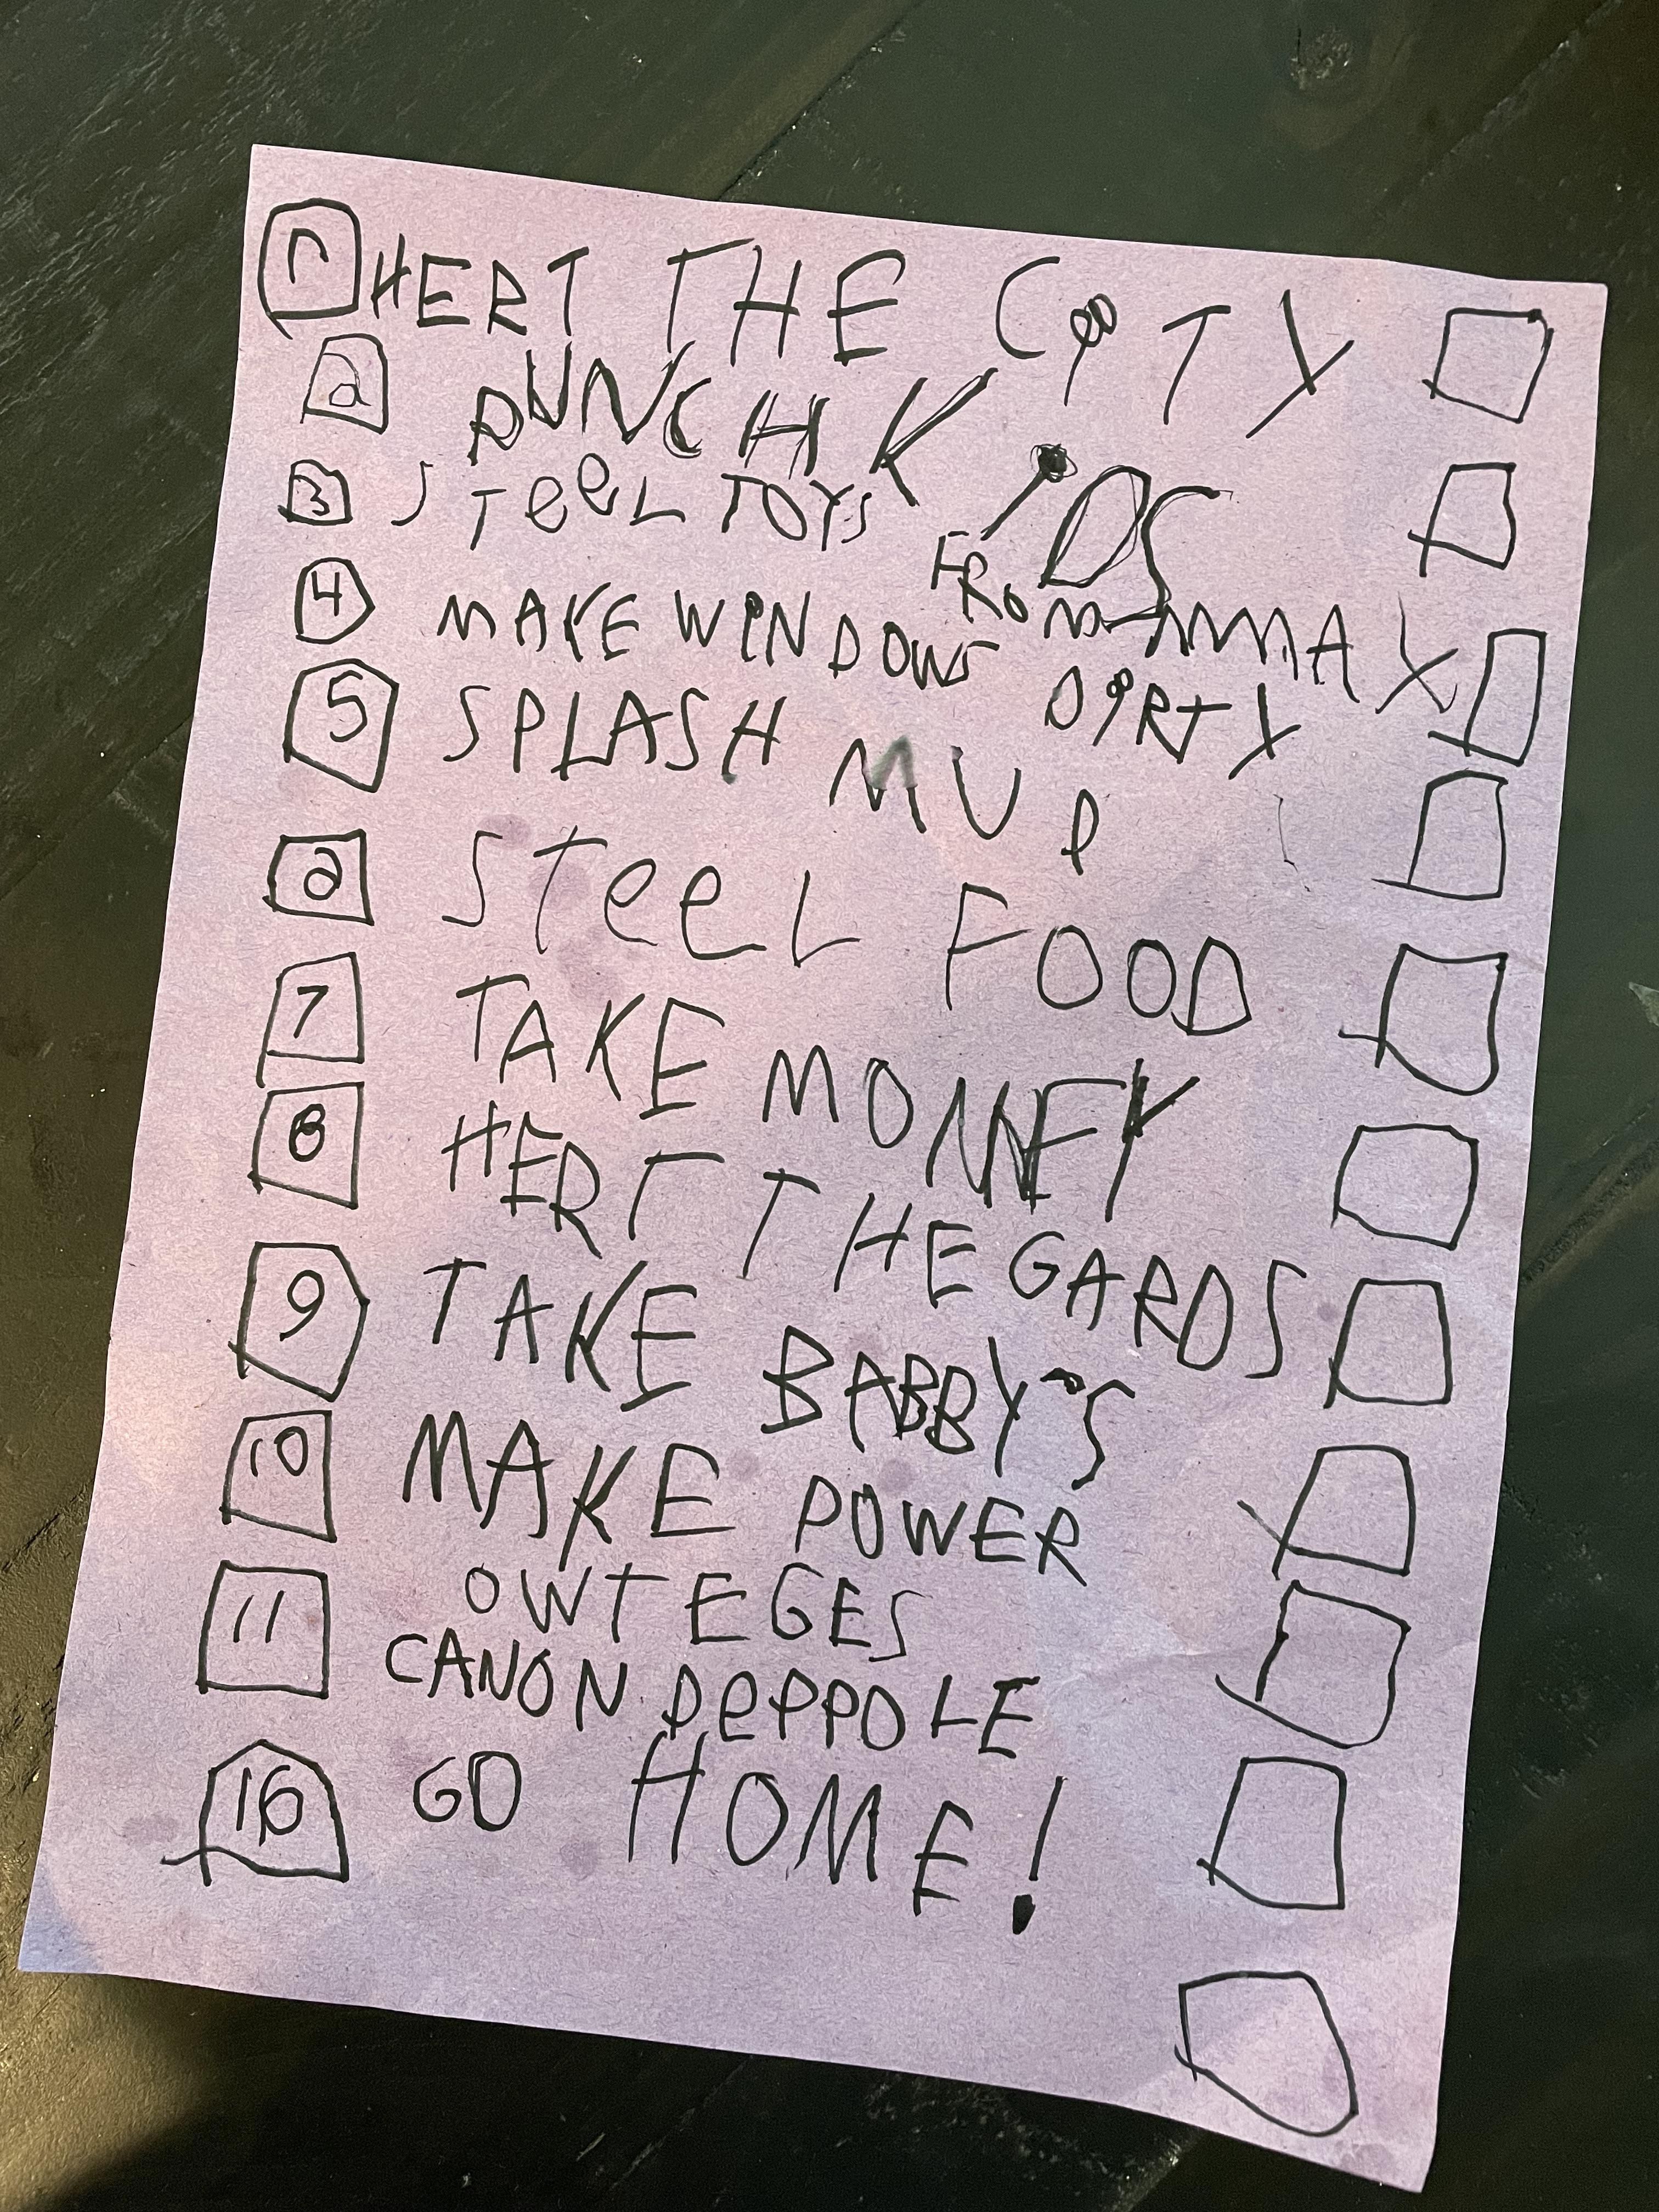 A Villain’s To-Do List - courtesy of my 5 year old